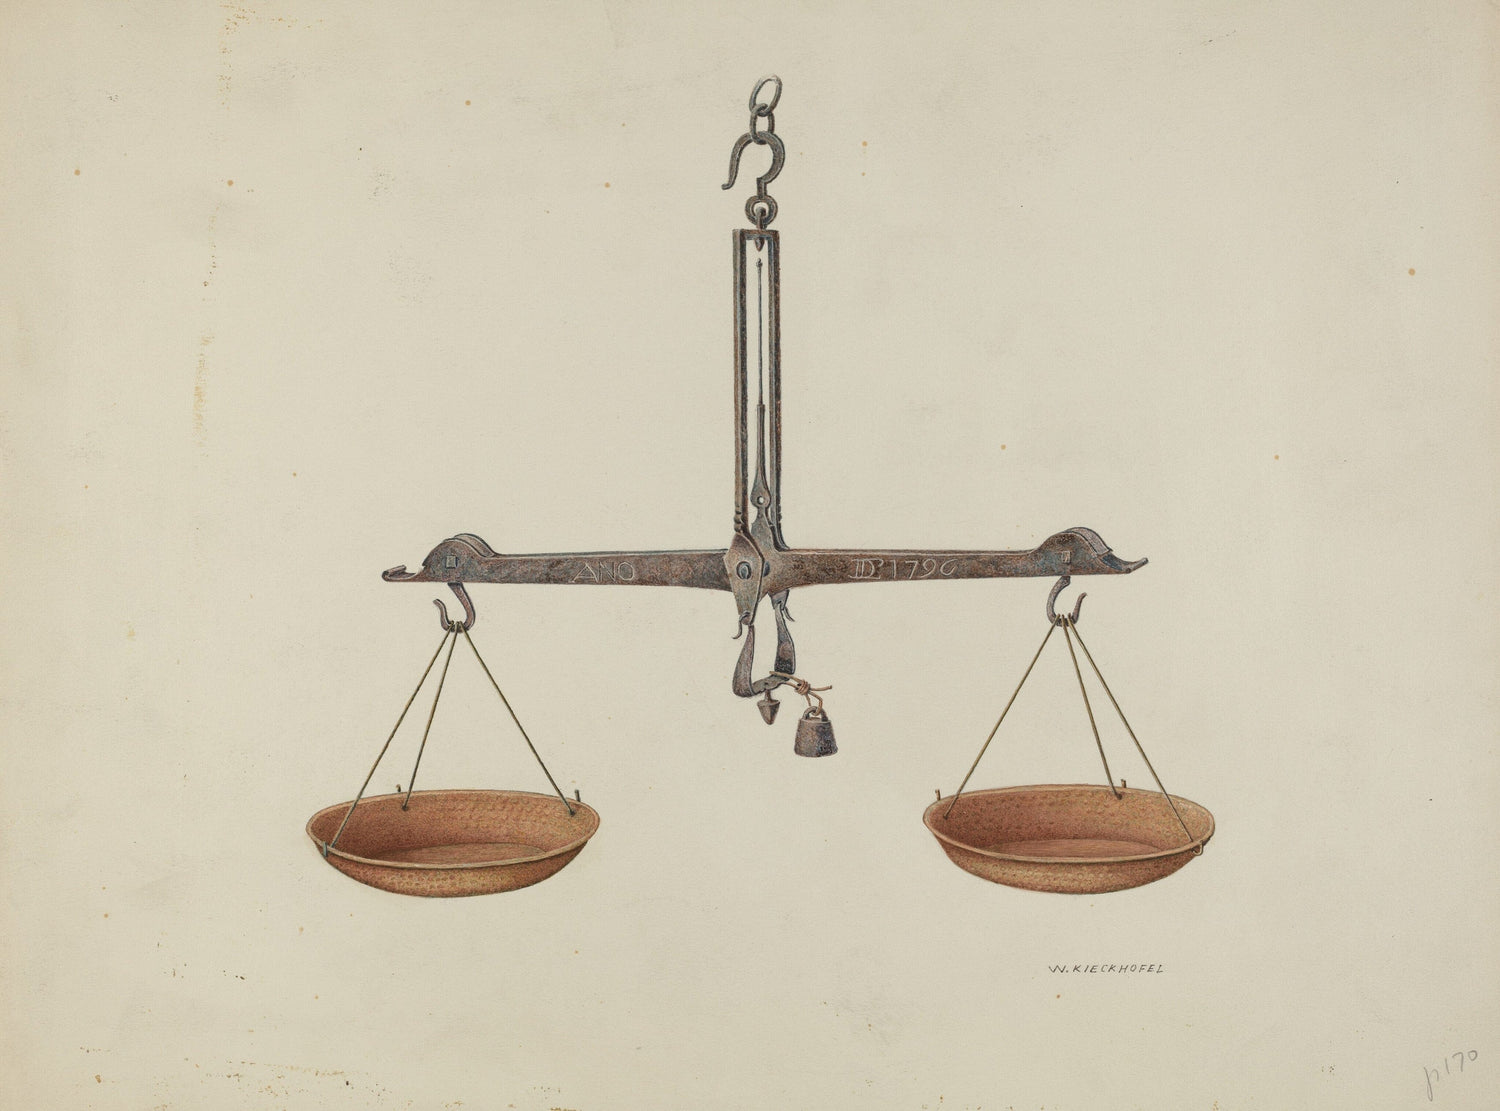 Balance scales (1940s) | Home office prints Posters, Prints, & Visual Artwork The Trumpet Shop   